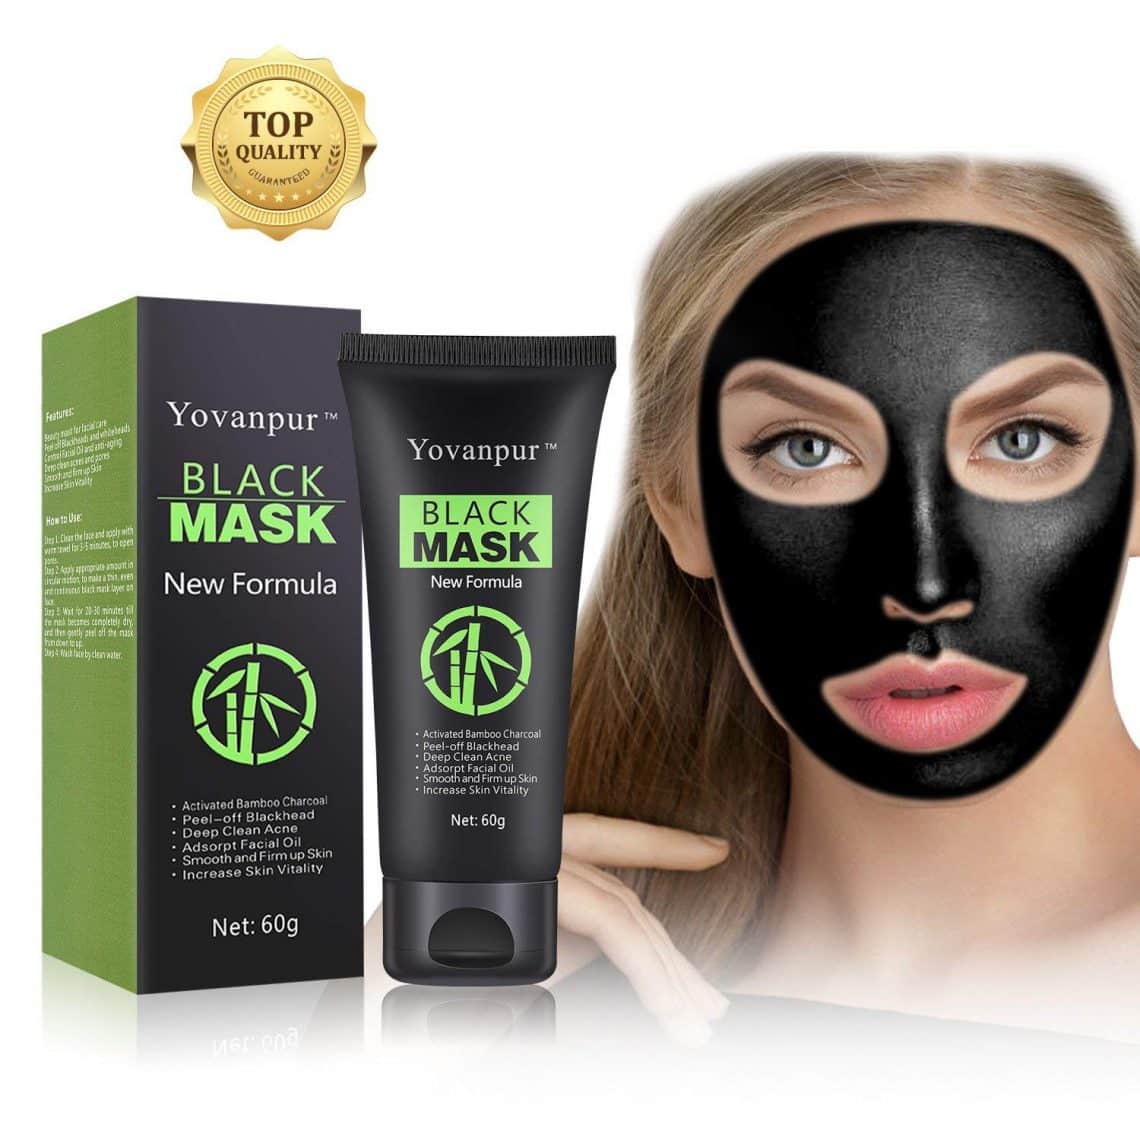 Top 10 Best Blackhead Remover Masks in 2022 Reviews | Buyer's Guide